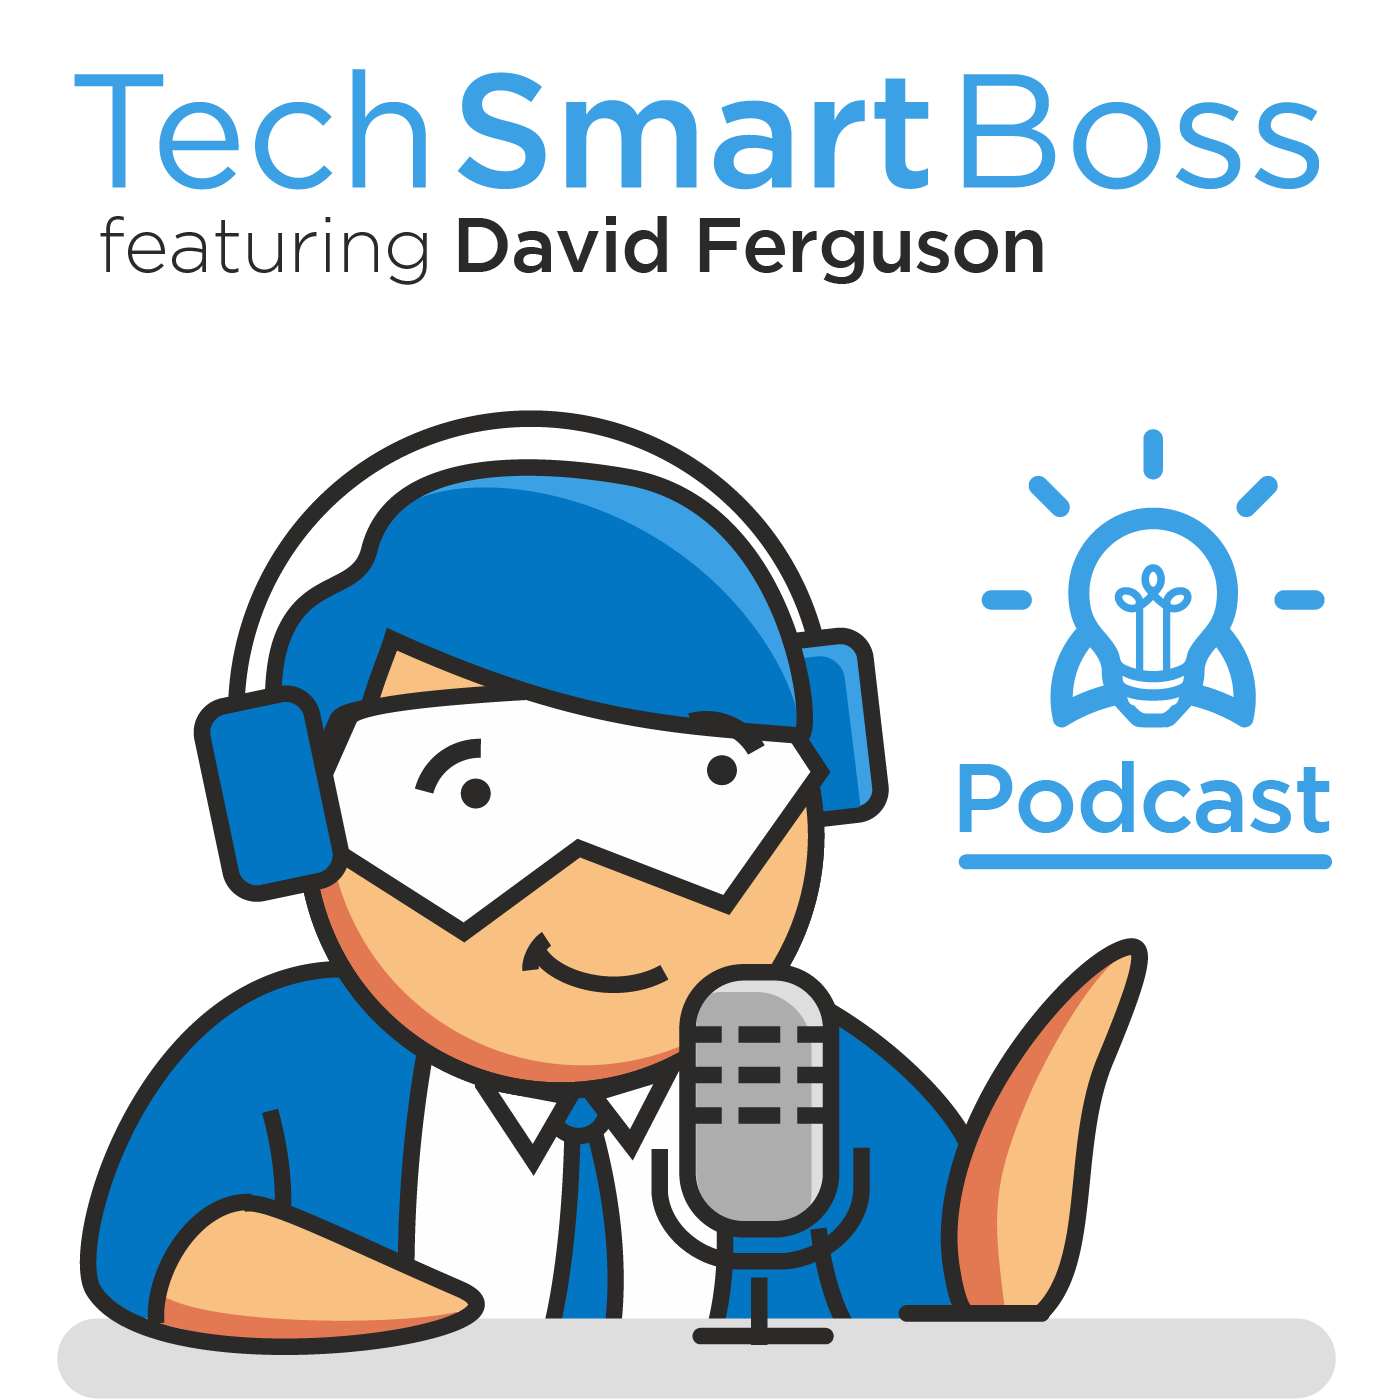 Episode 54: How To Make Slack the Hub of Communication for Your Tech Smart Business